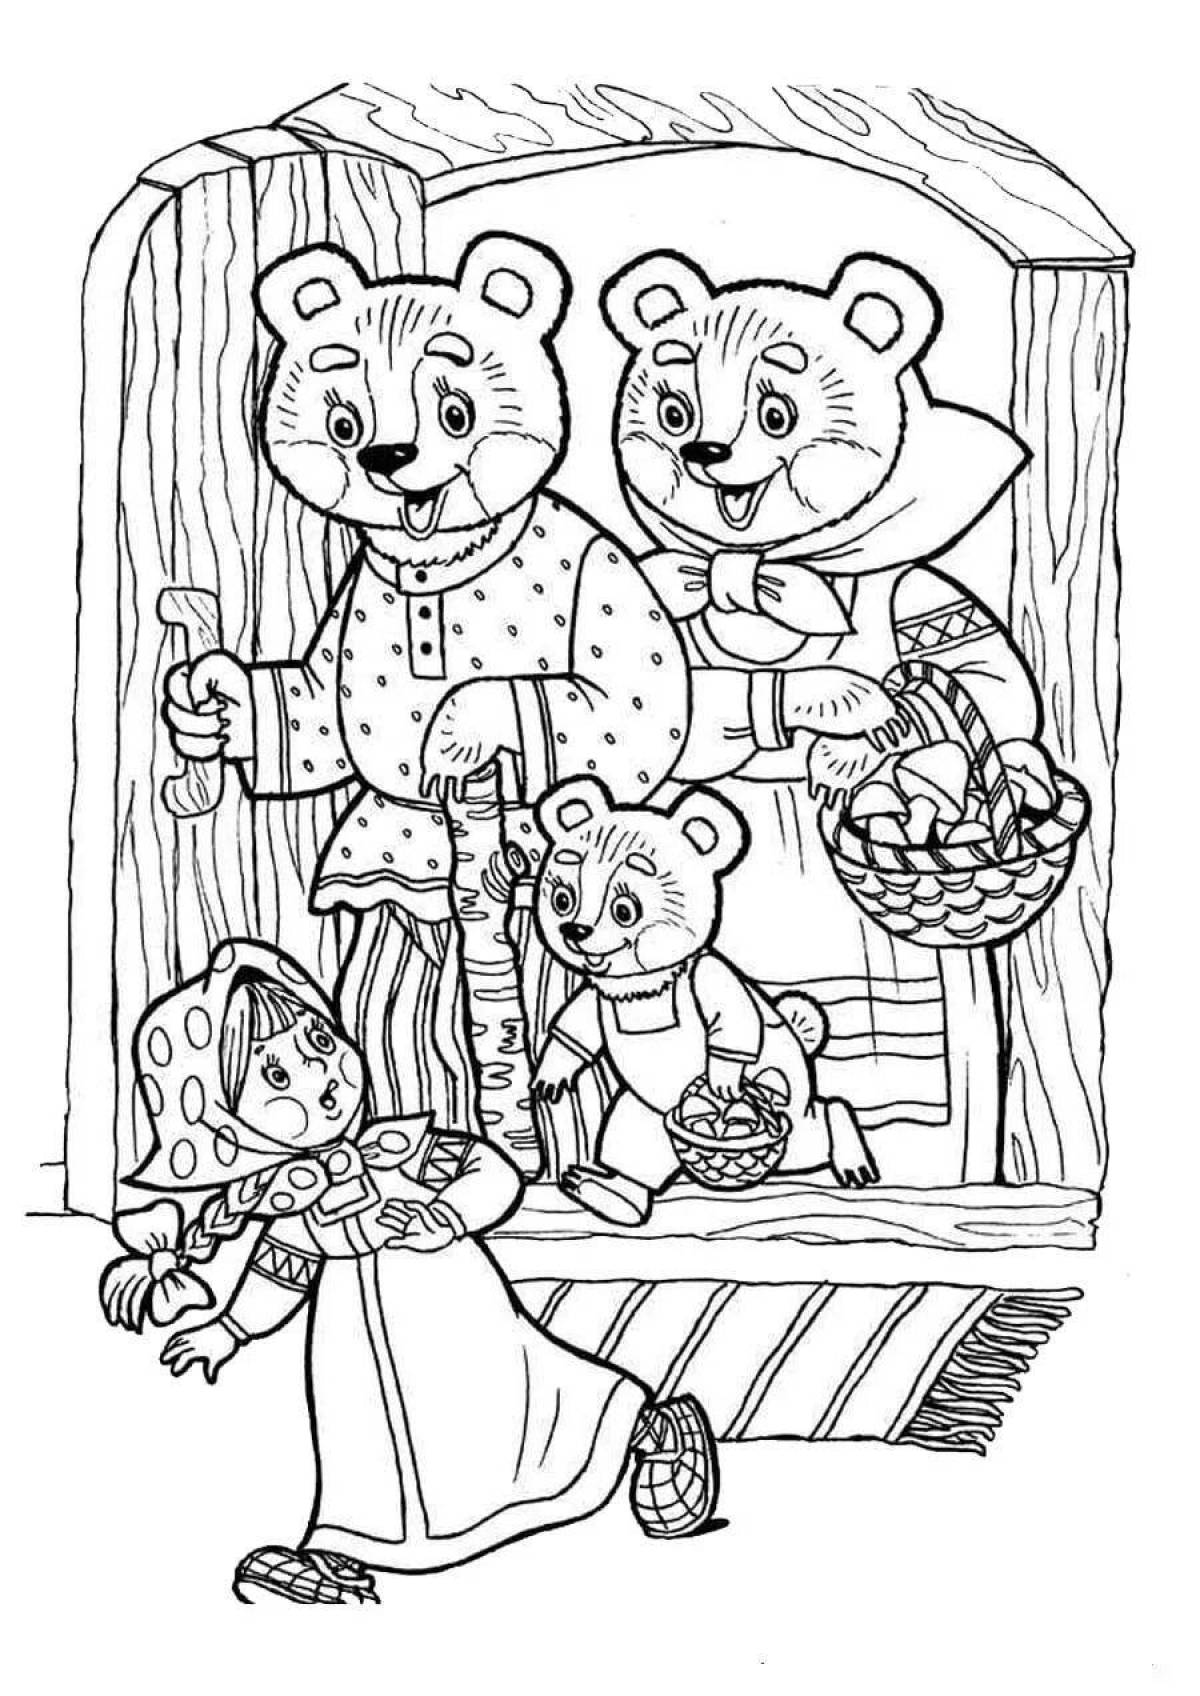 3 bears fun coloring book for little ones